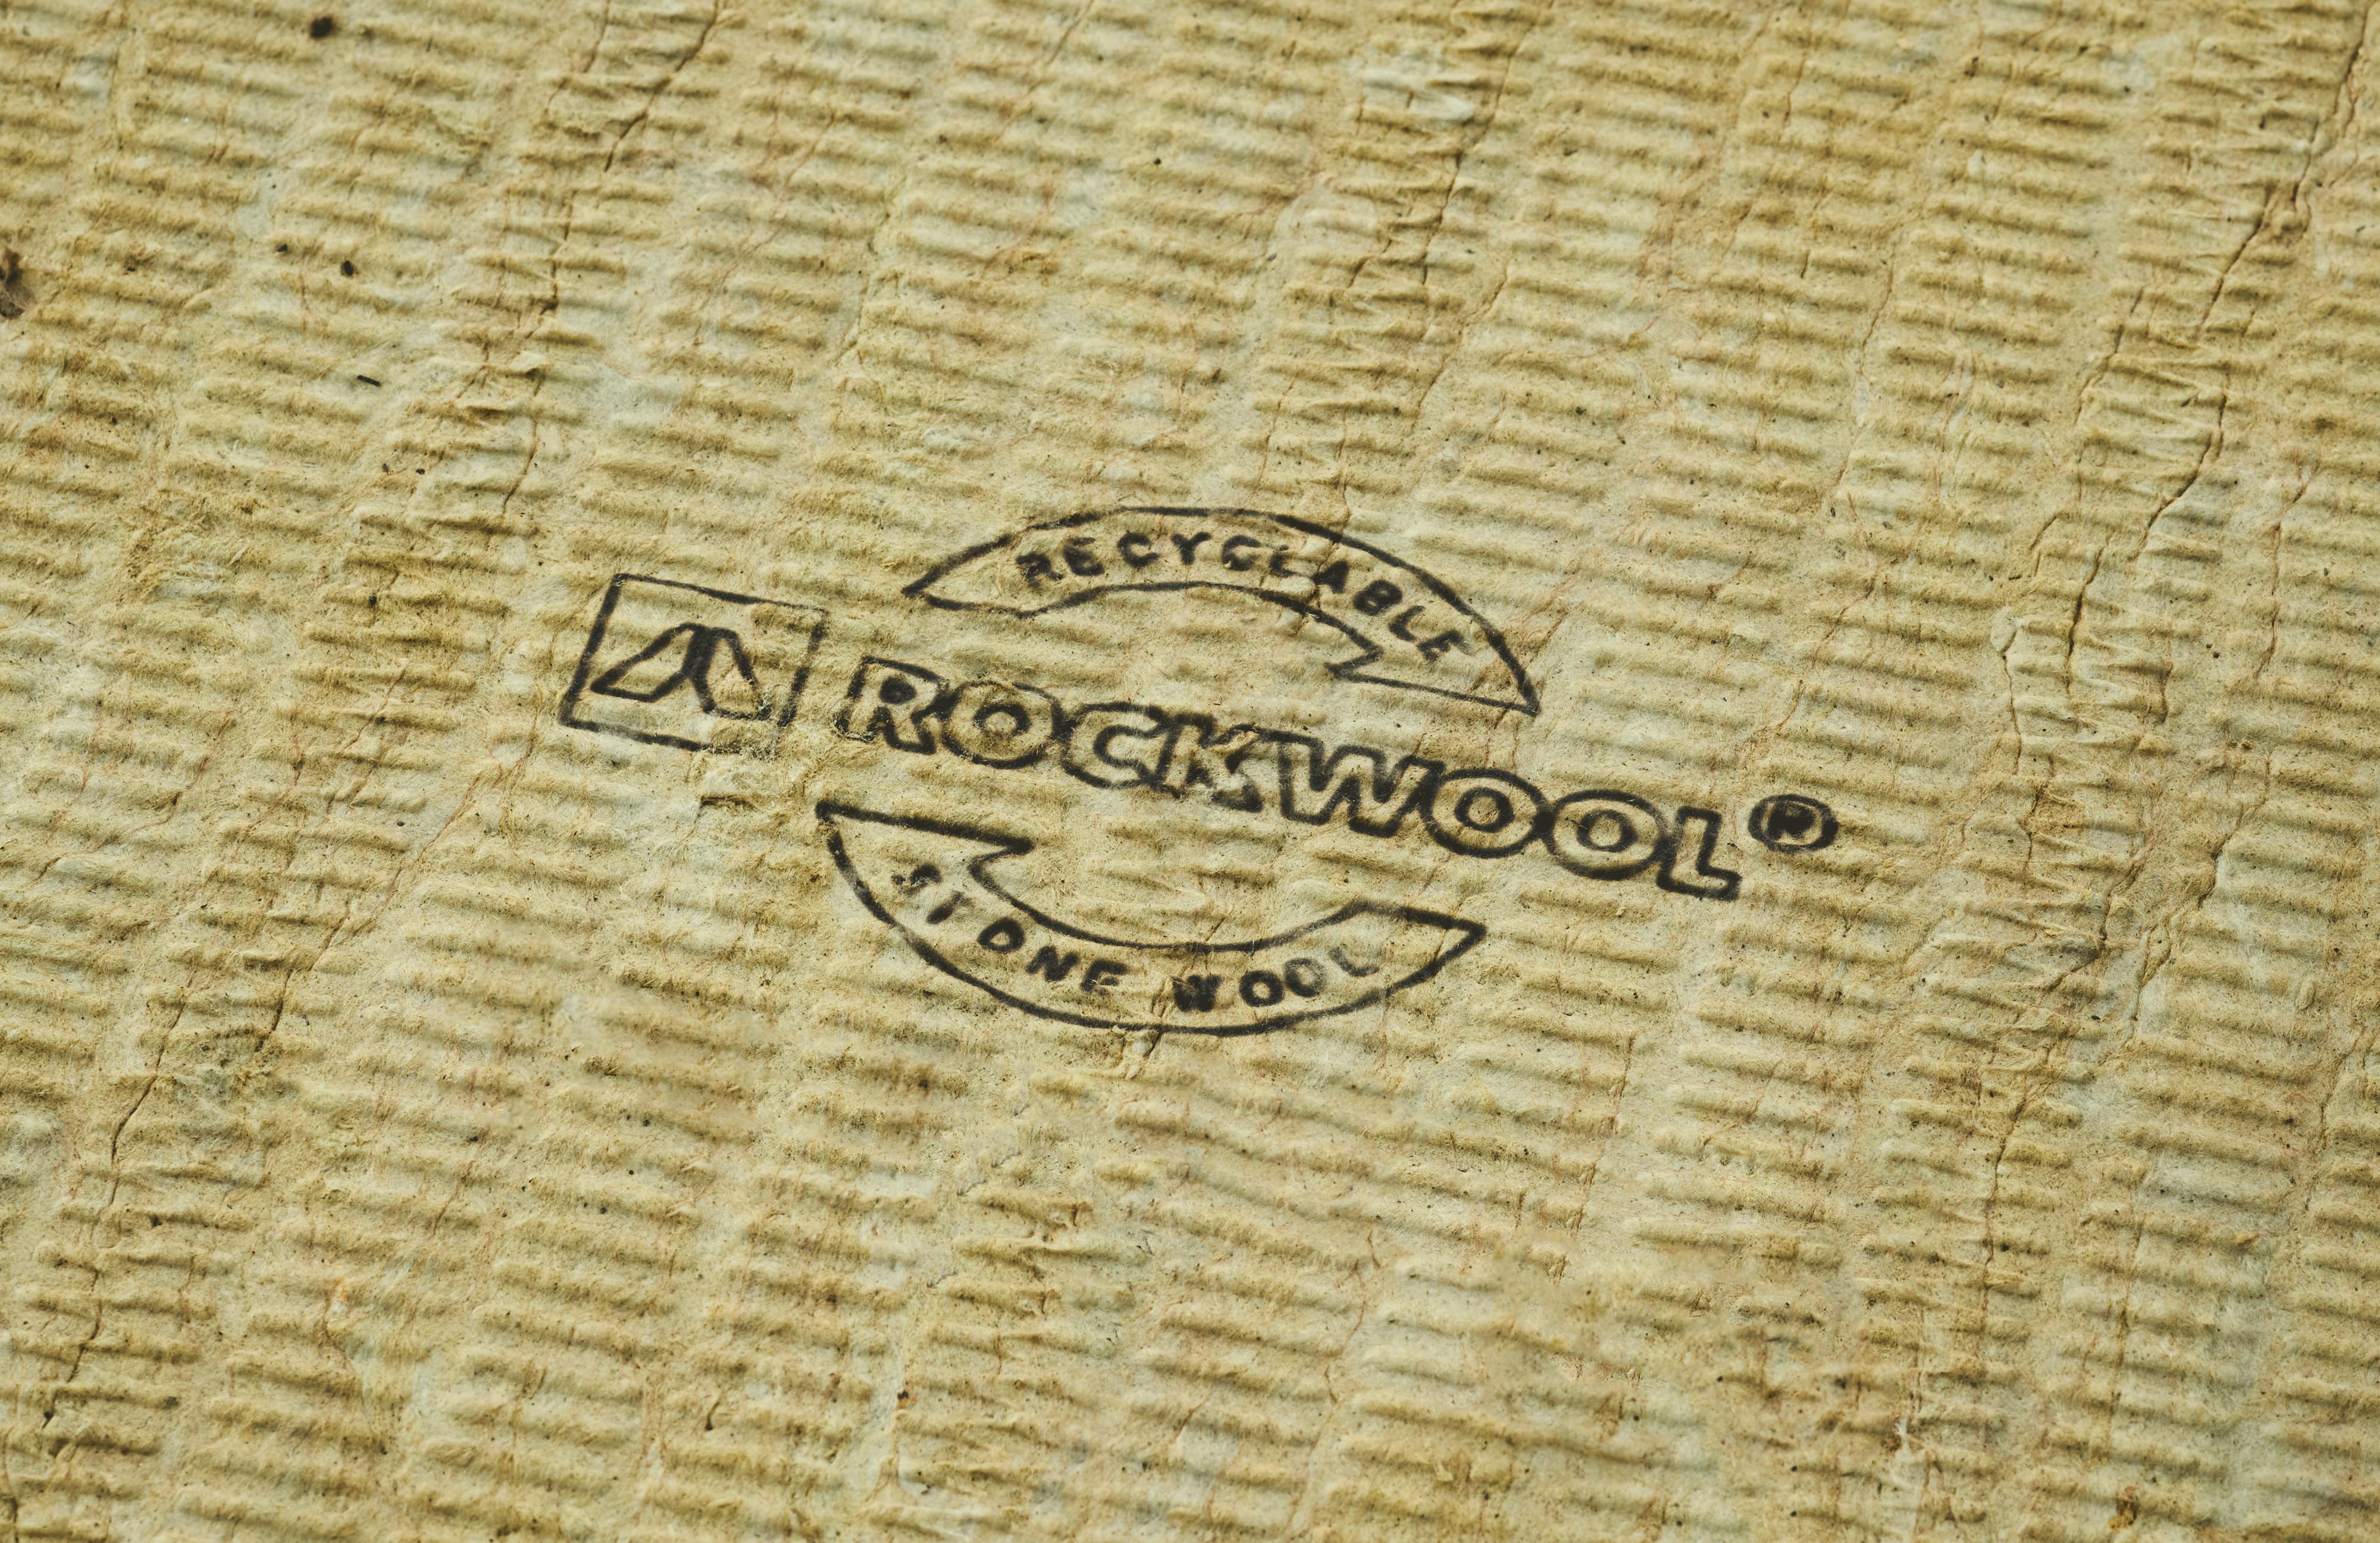 recyclable stone wool, recycable stone wool, germany, recycling, logo, flatroof plate, fri, plate, rockcycle